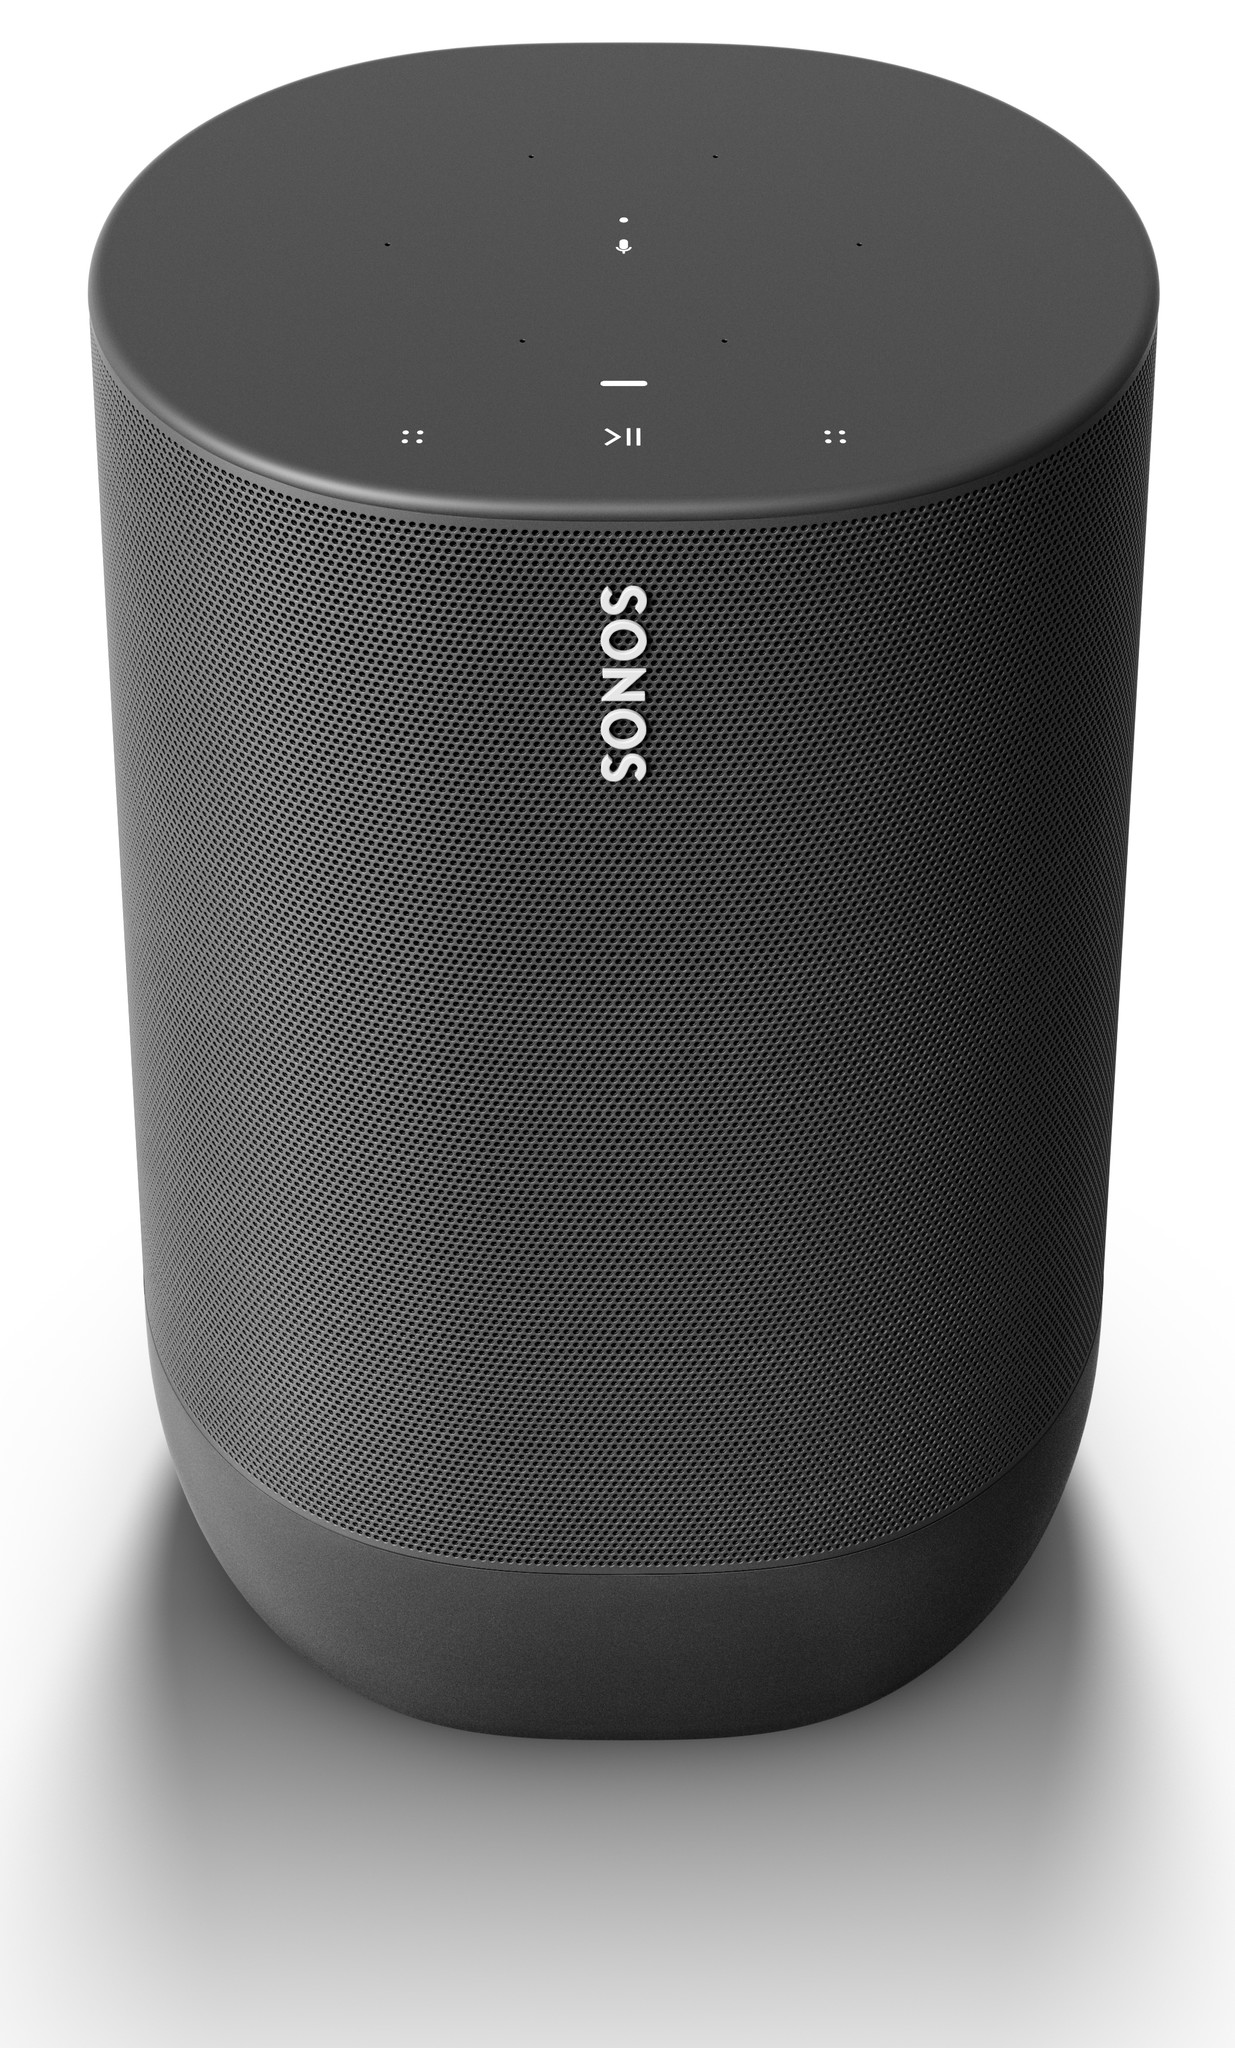 There are so many Alexa speakers so let us help you decide which to buy